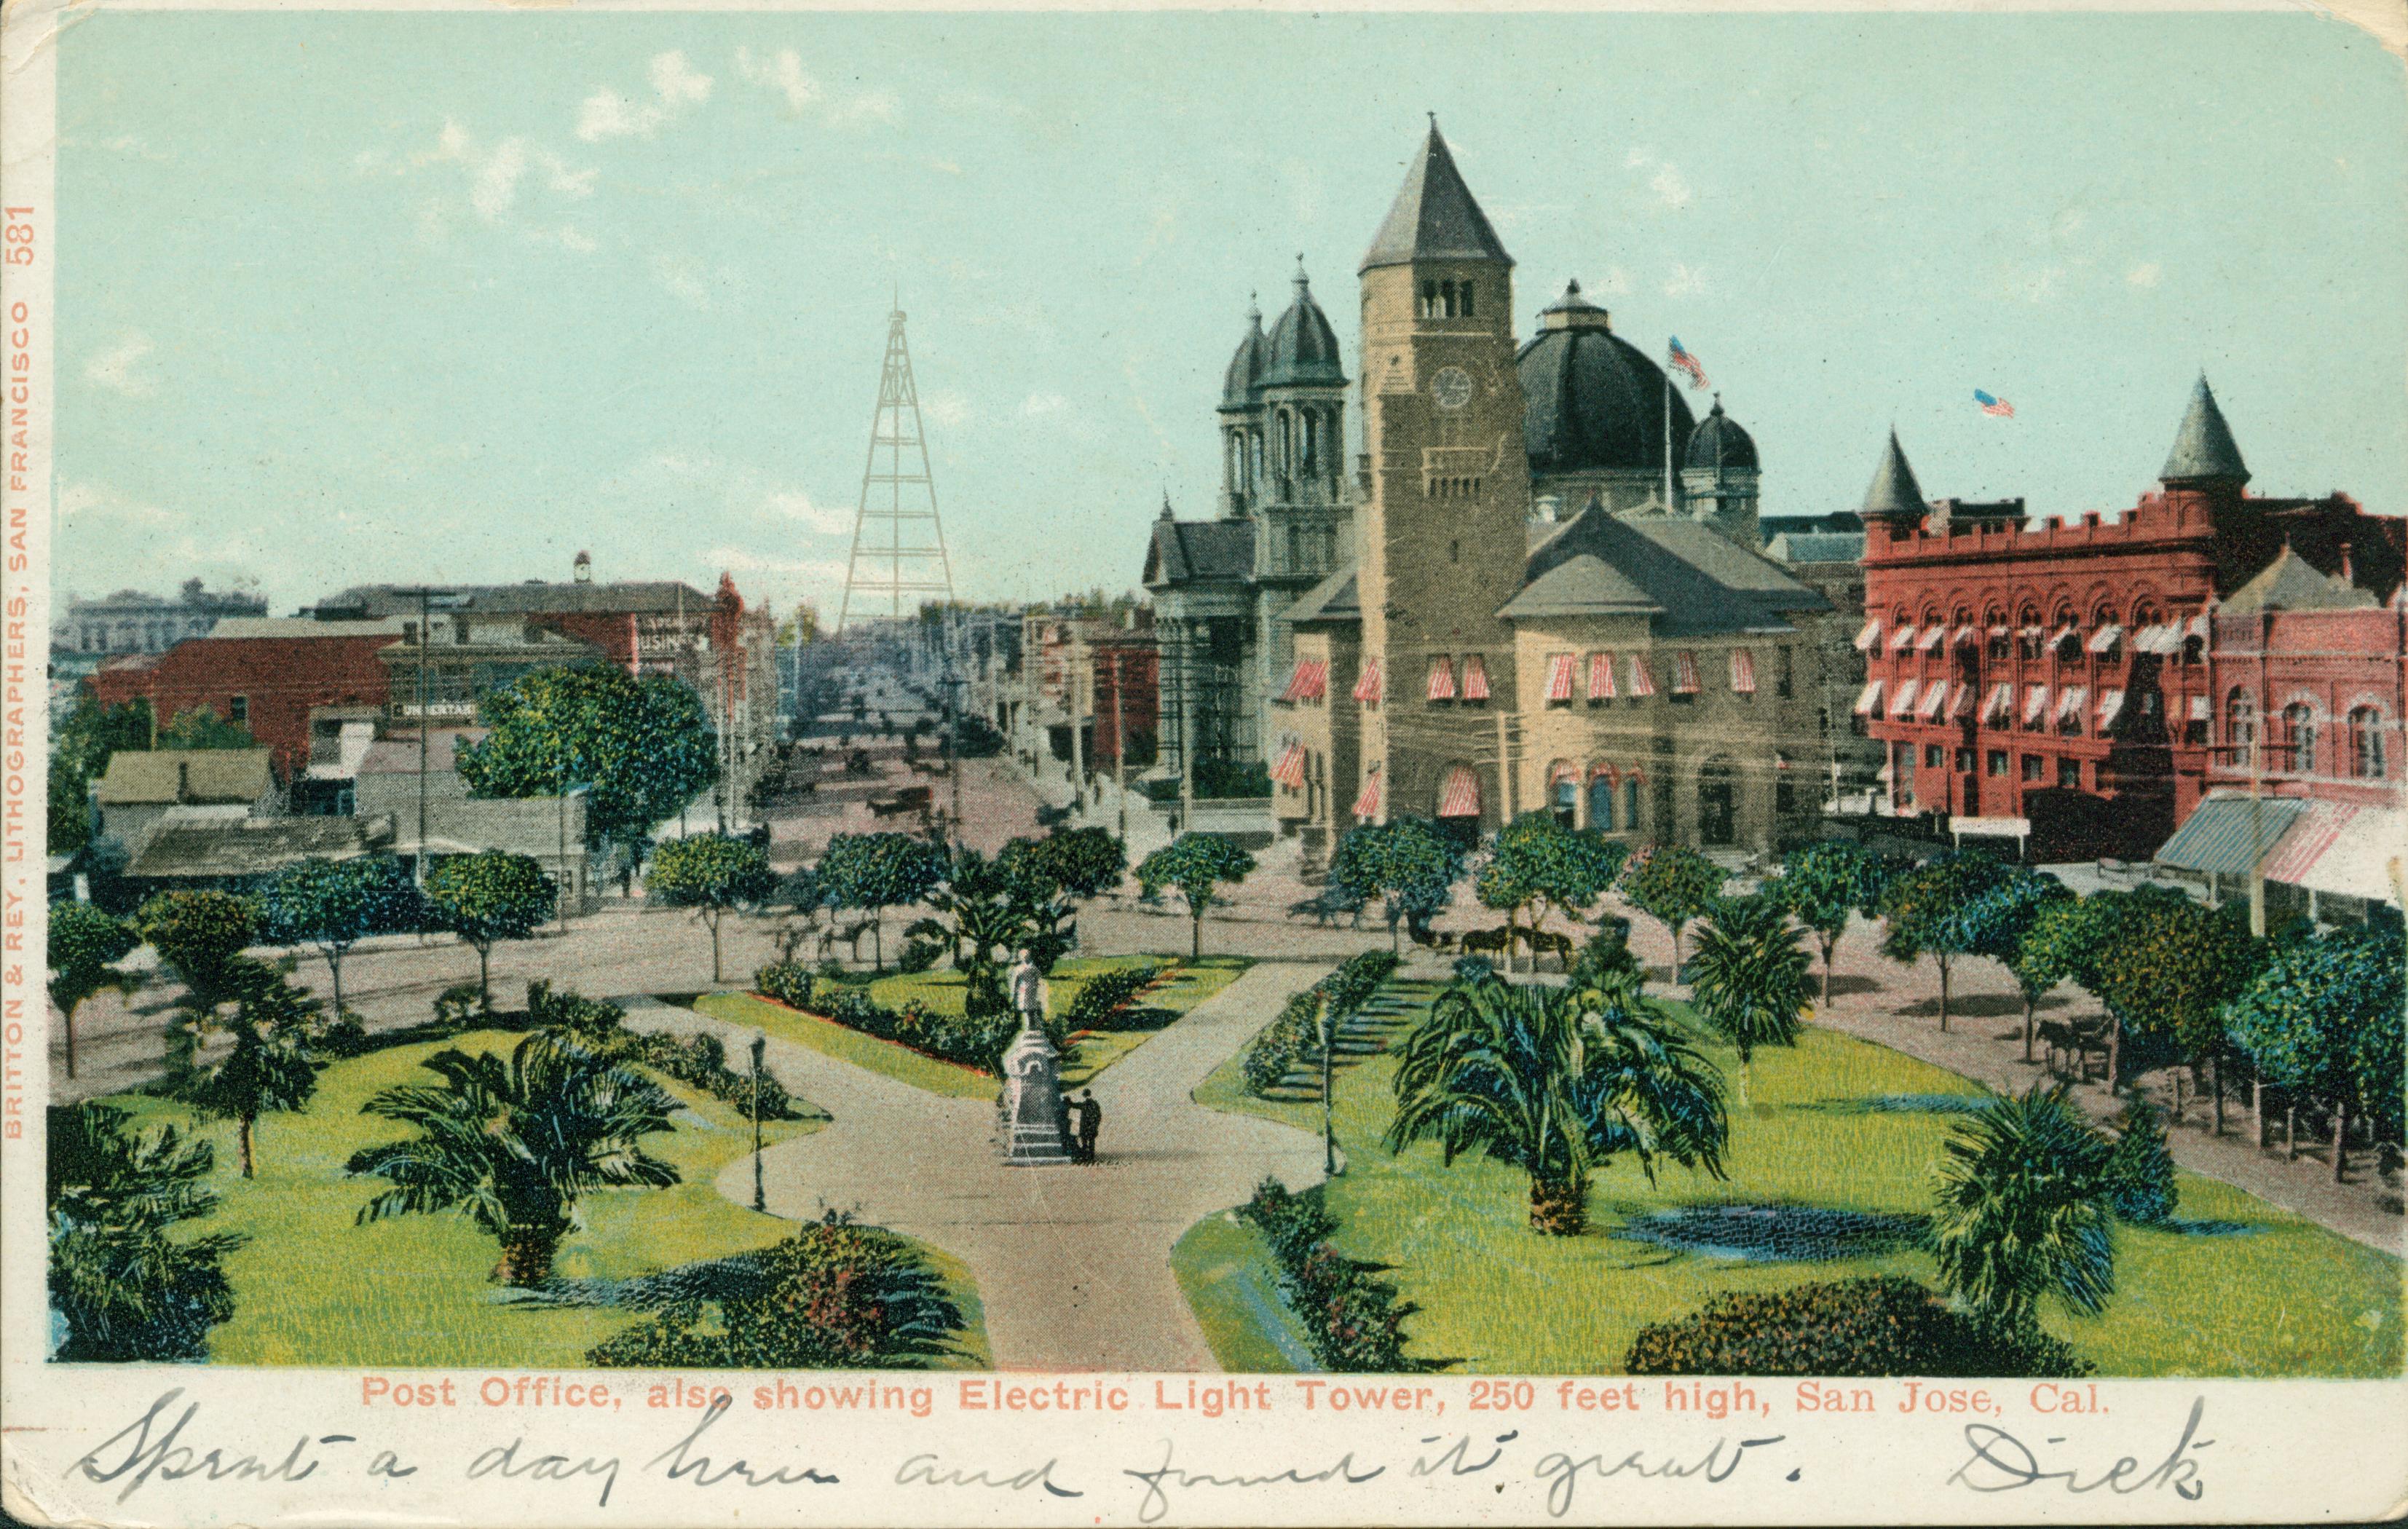 View of post office, electric tower, buildings, parks, electric light tower